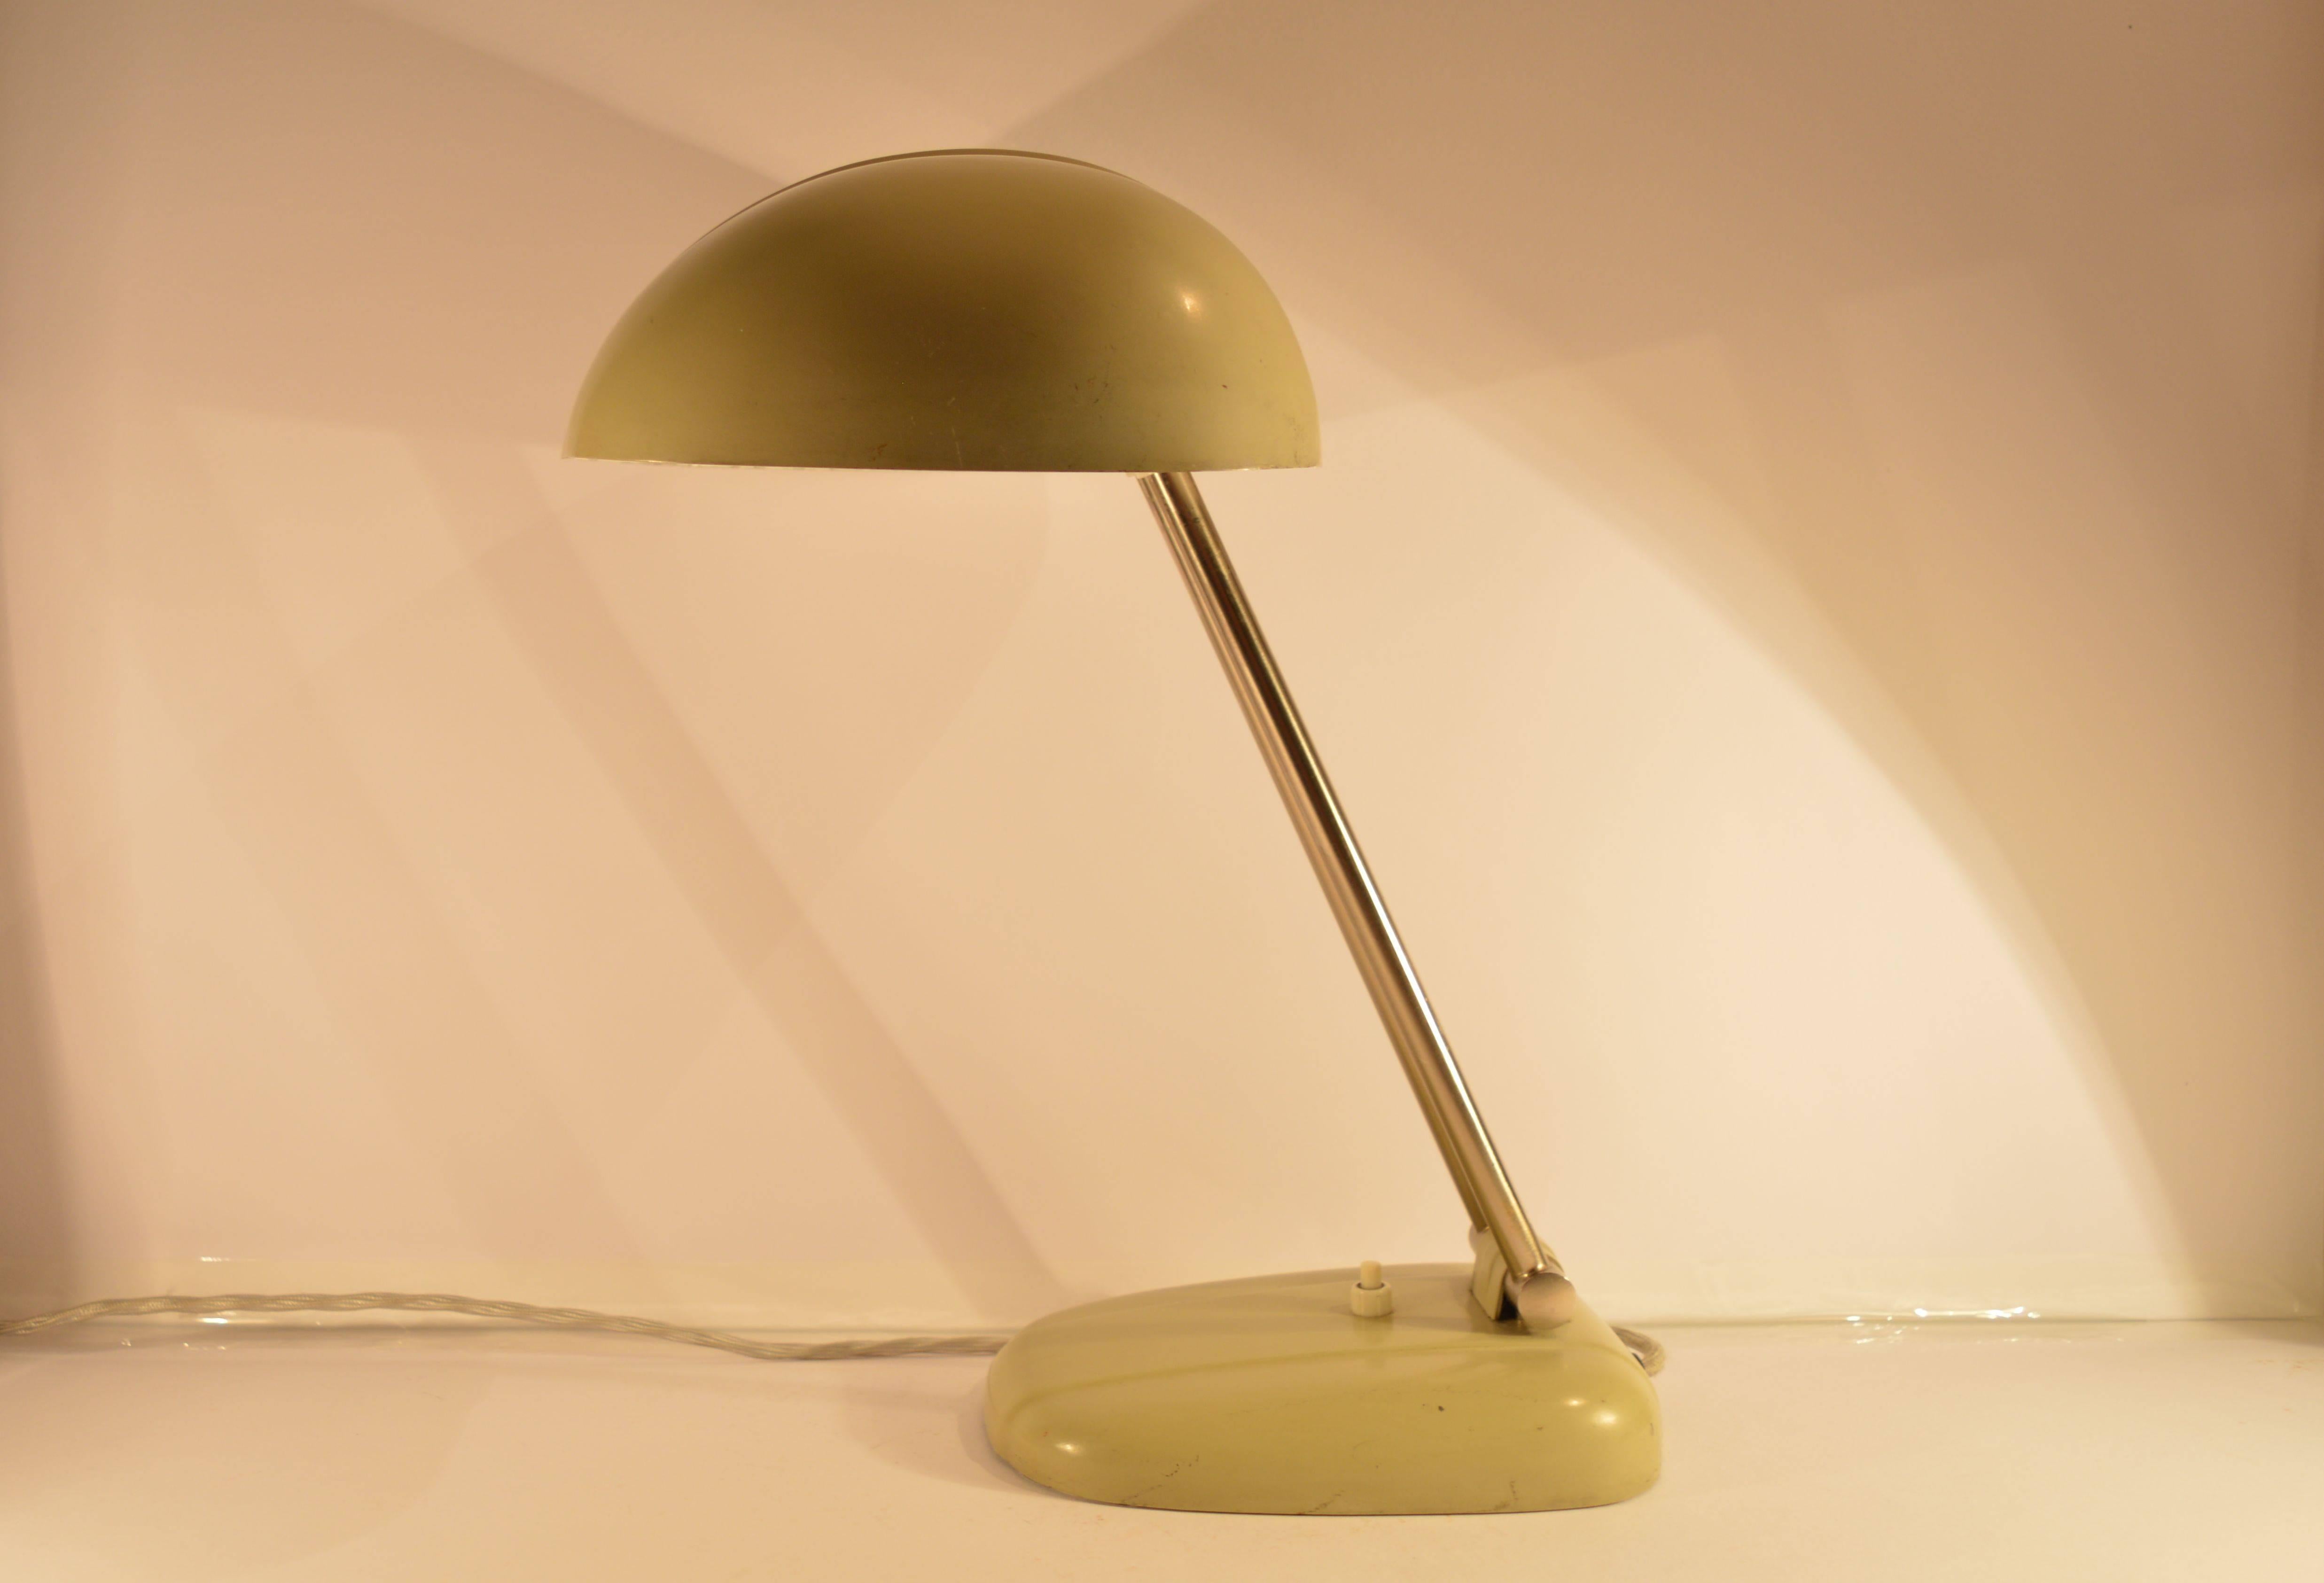 This table lamp was designed by Siegfried Giedion for BAG Turgi in the 1930s. It is made from steel and chrome. Good/fair, this vintage item remains fully functional, but it shows sign of age through scuffs, dings, faded finishes, minimal upholstery